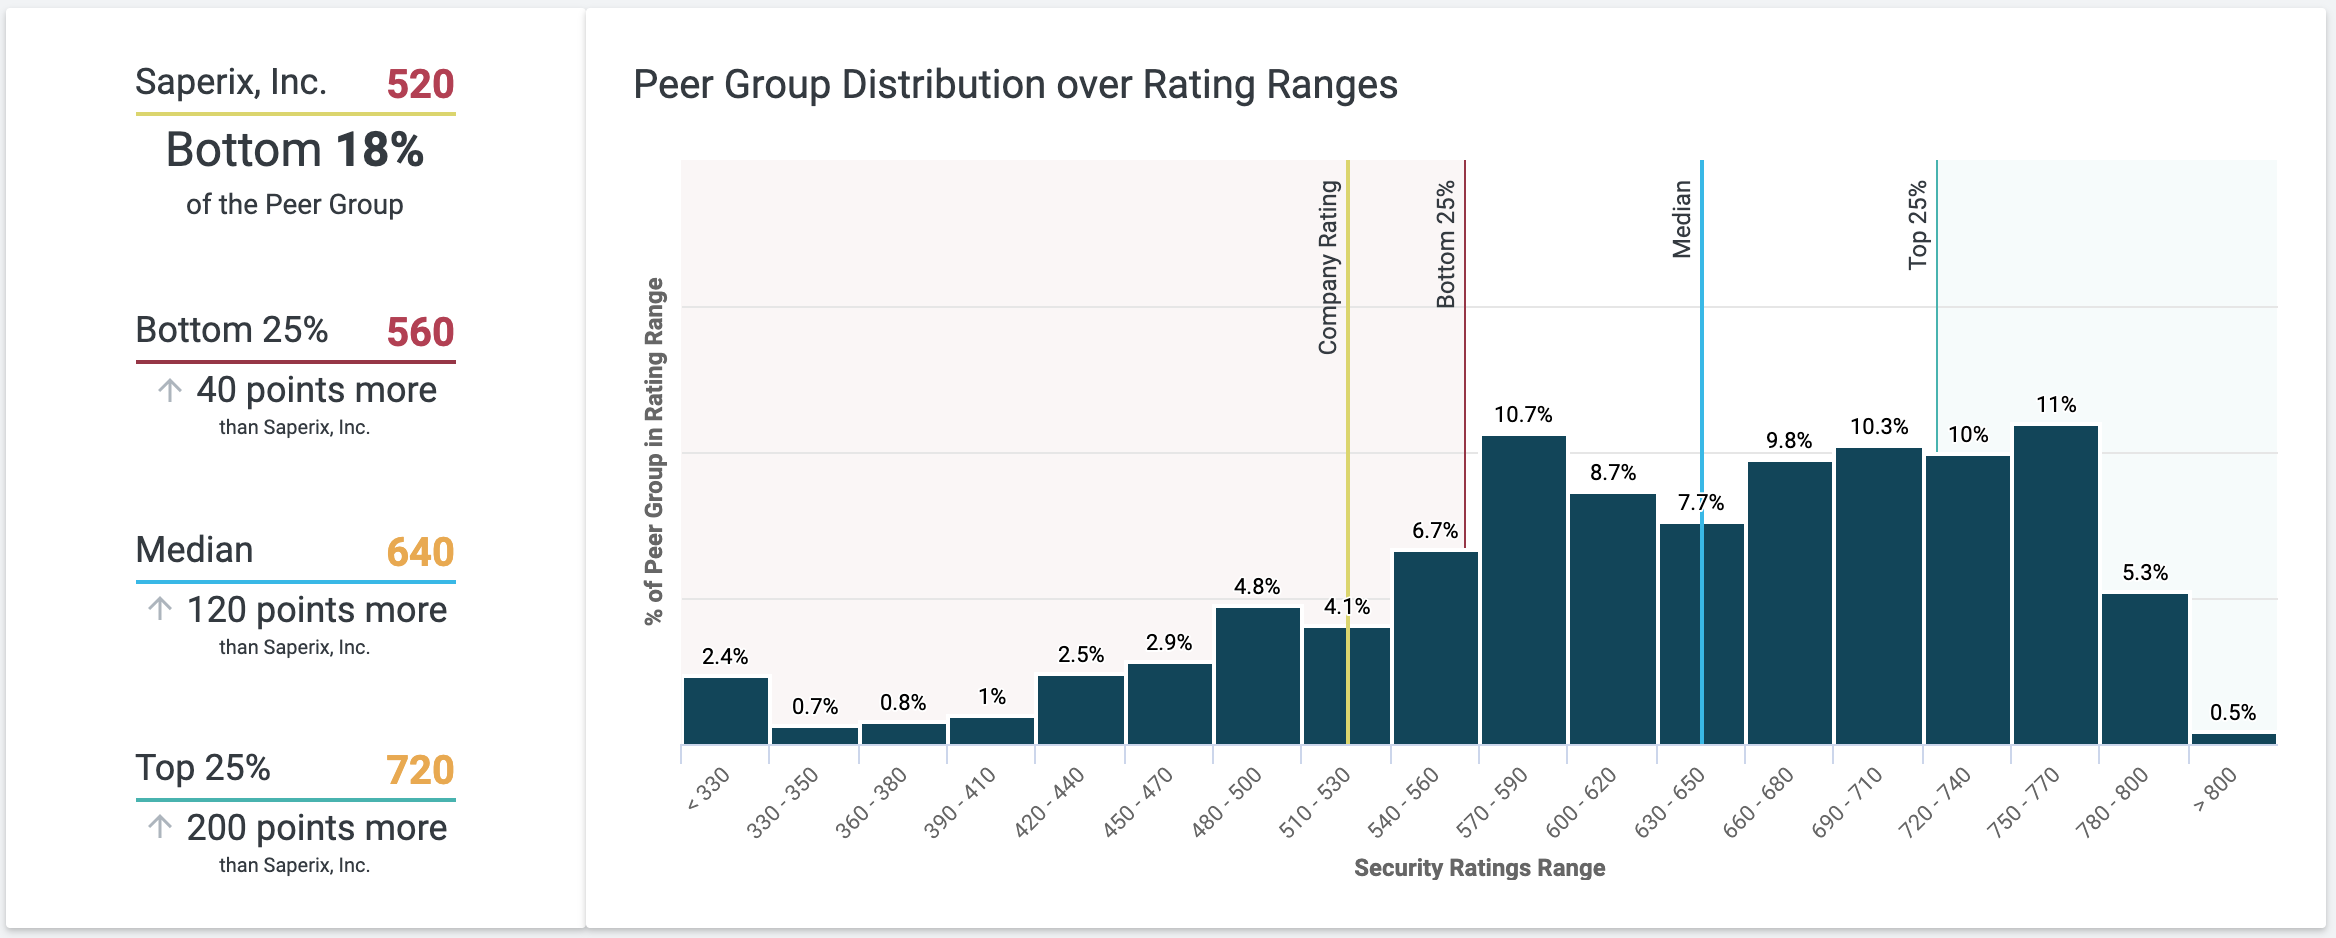 Peer Group Distribution over Rating Ranges chart in the Overview